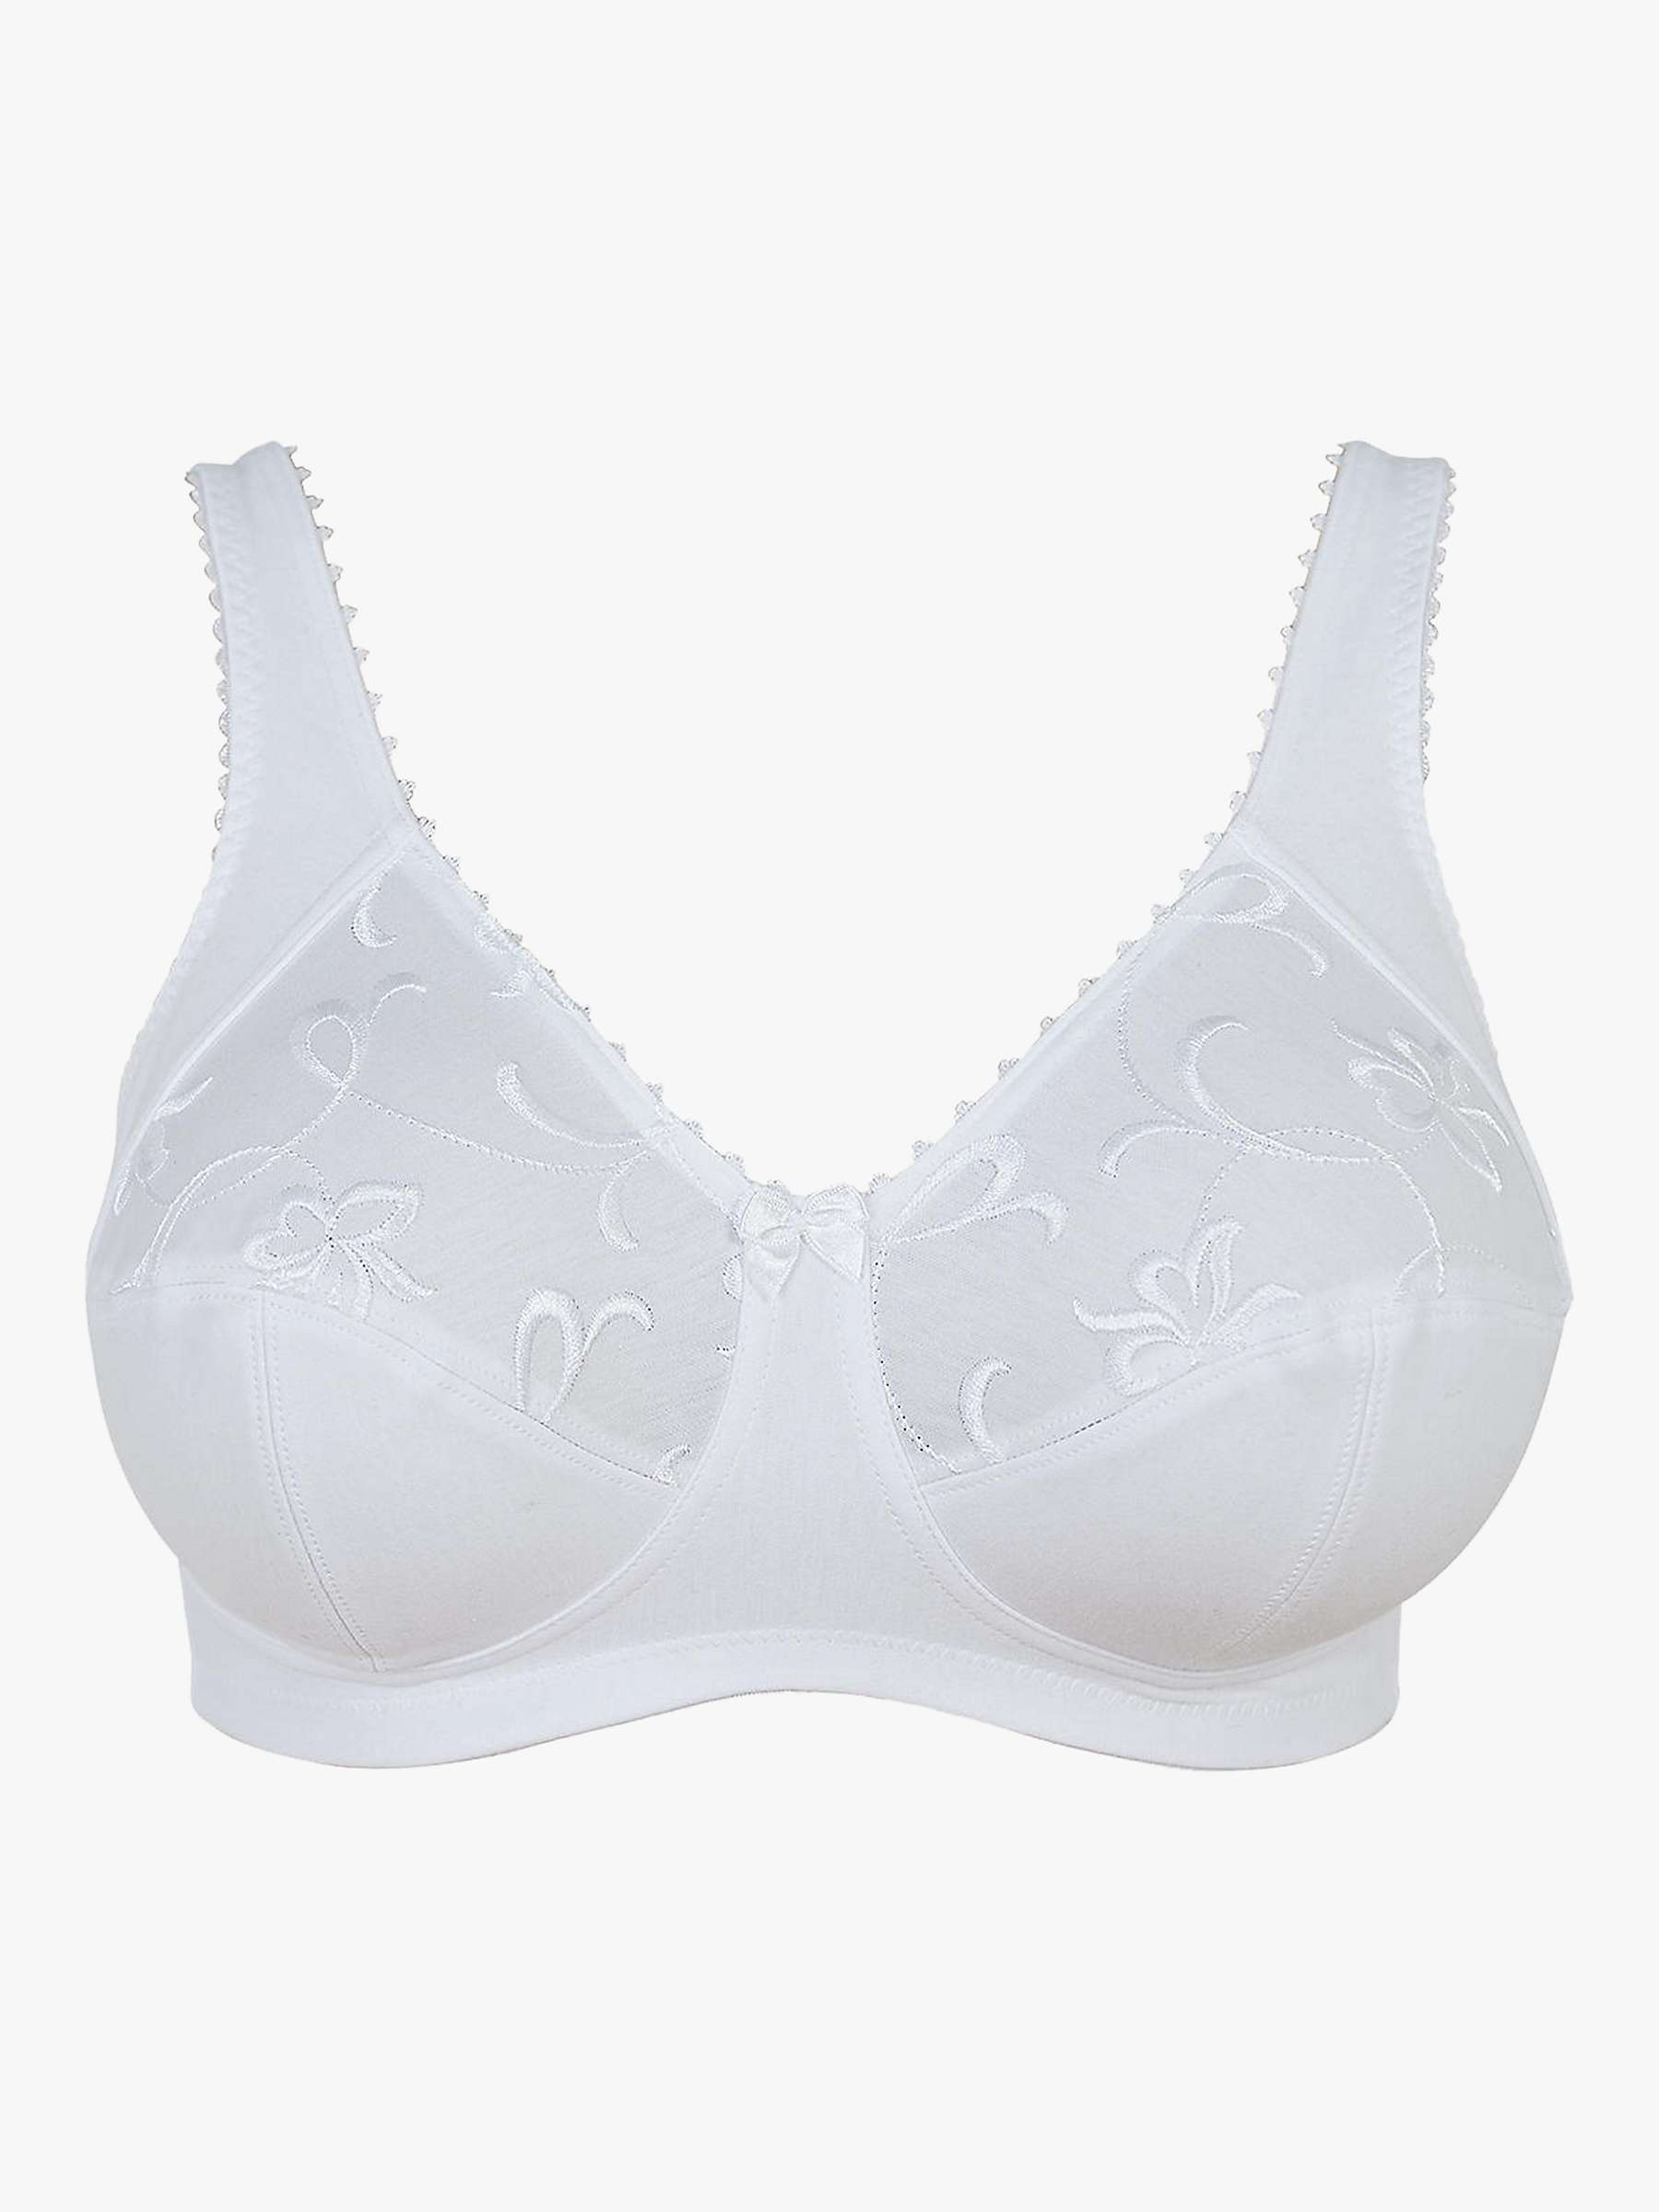 Buy Royce Grace 513 Cotton Rich Non-Wired Bra Online at johnlewis.com